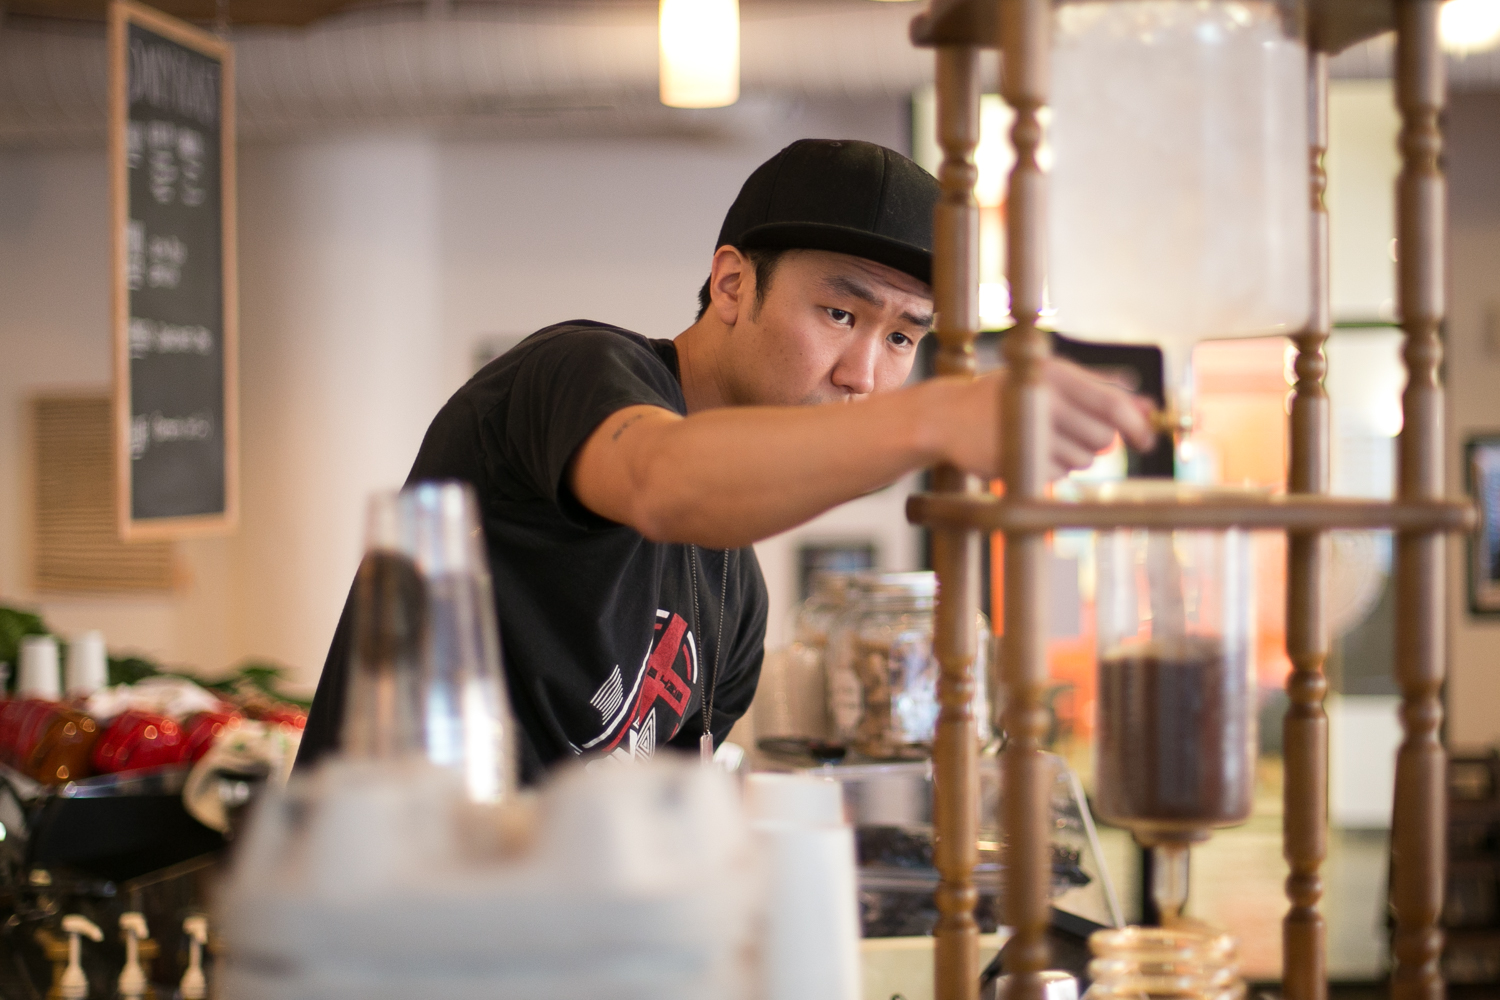   Thomas sets the drip speed on the Yama tower at Tamp &amp; Tap. On a Monday morning, it's Thomas to the rescue. &nbsp;&nbsp;  